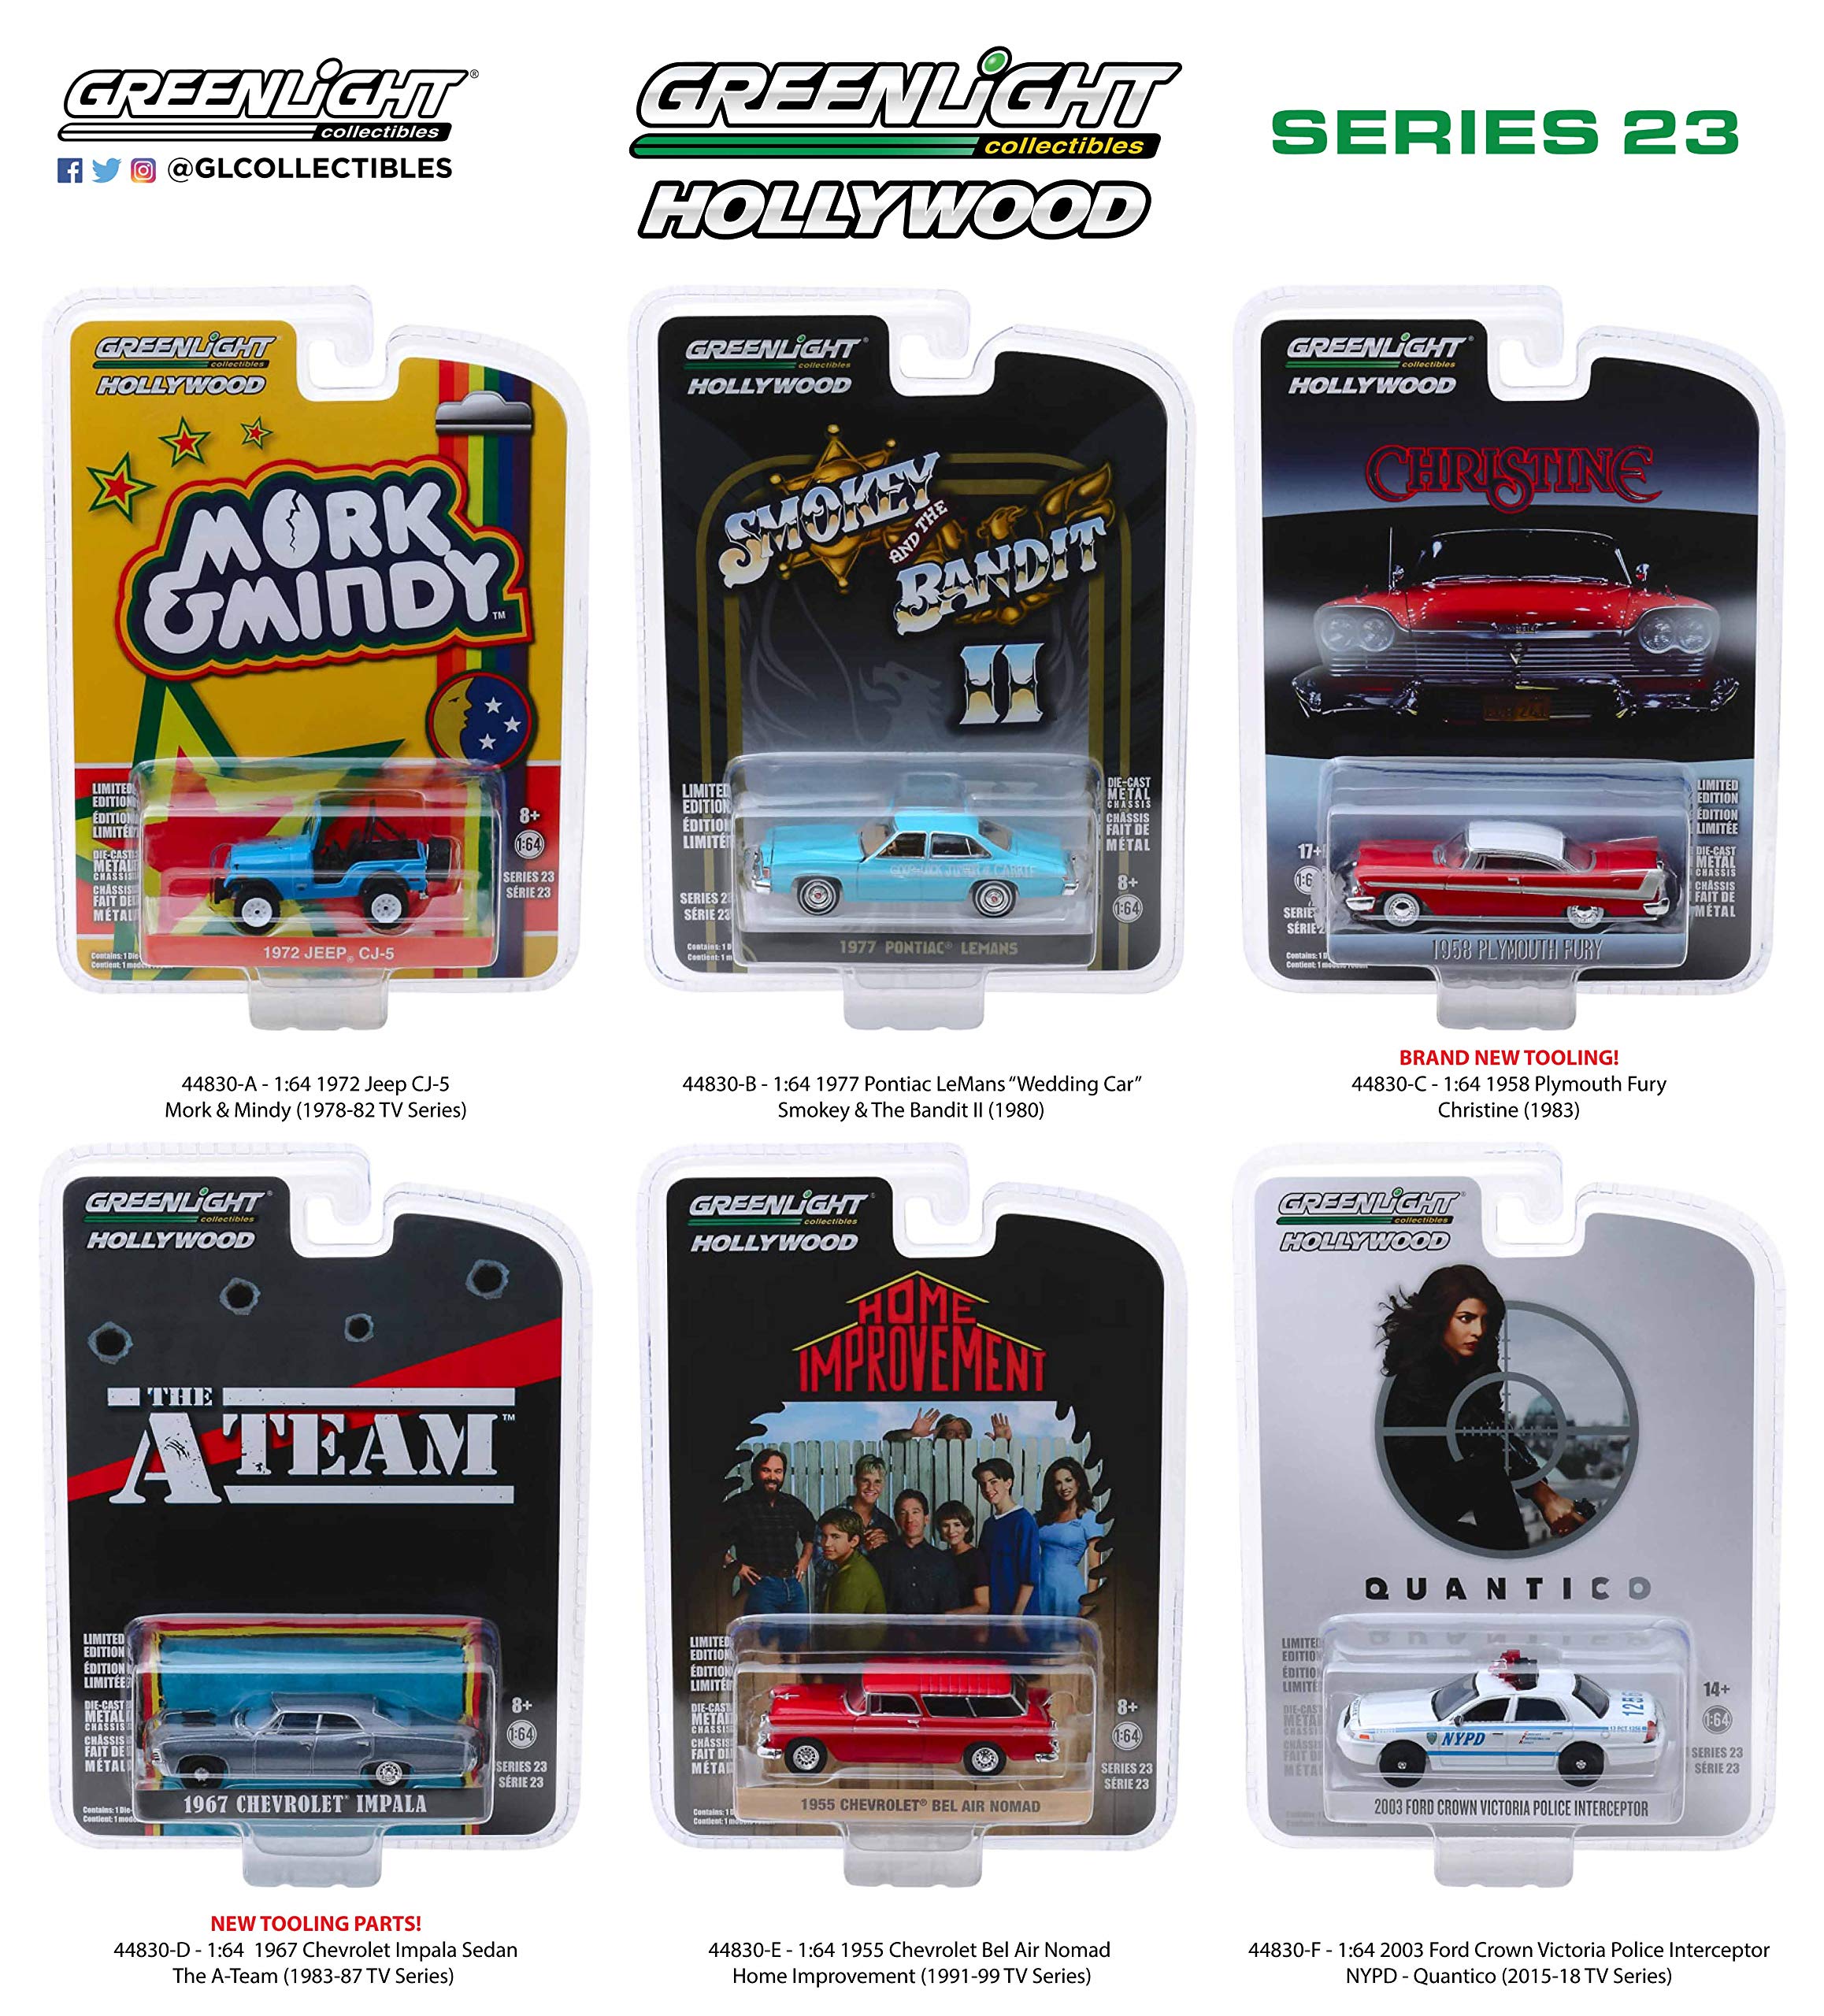 Greenlight Hollywood Series Release 23, Set of 6 Cars 1/64 Diecast Models 44830